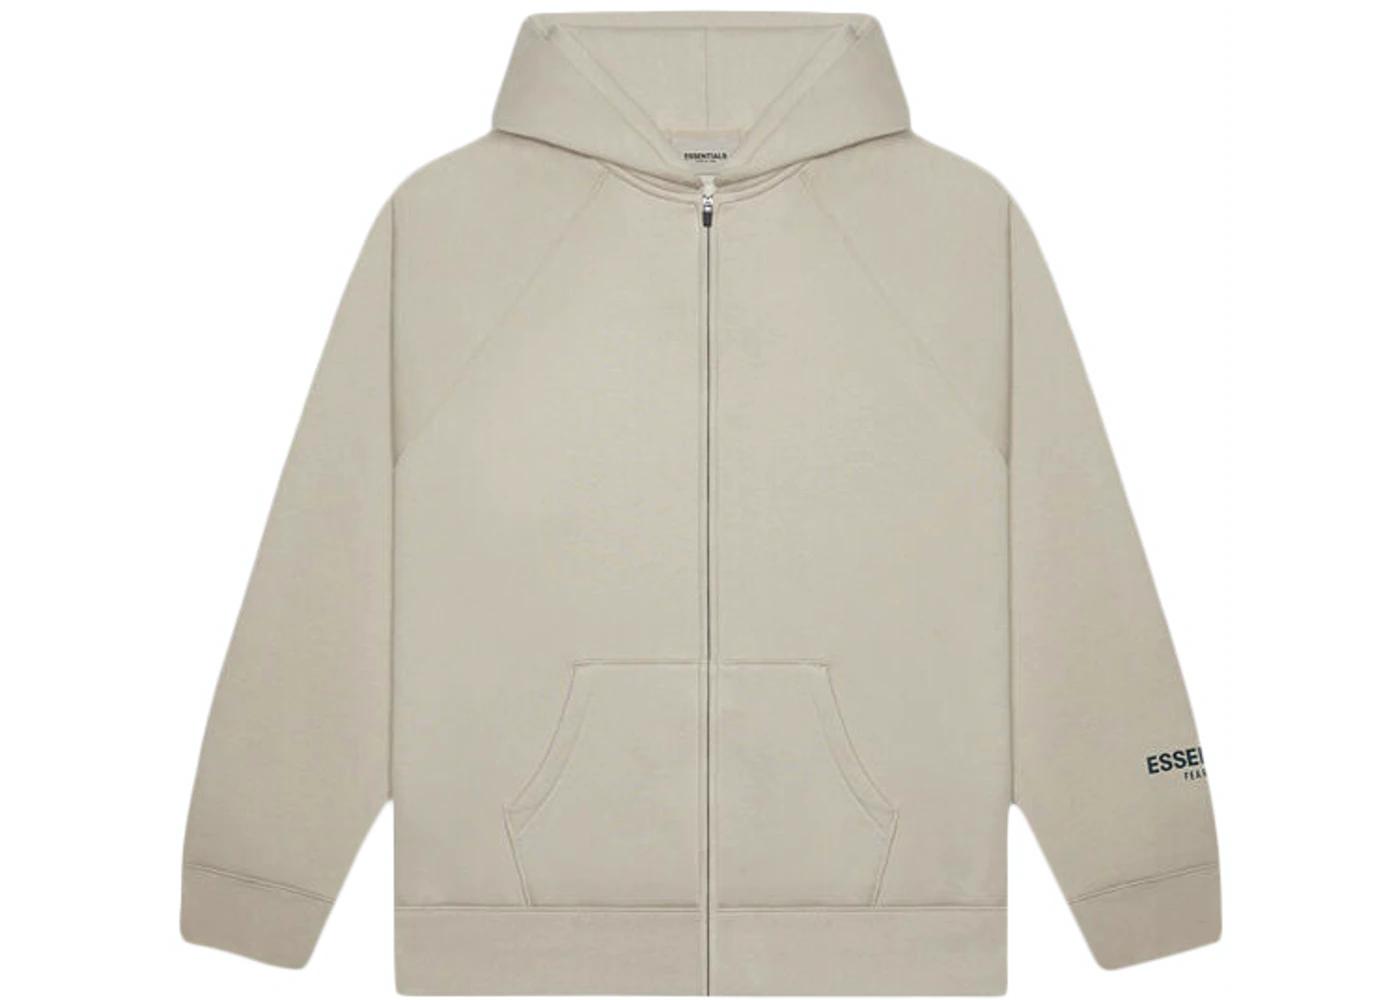 FEAR OF GOD ESSENTIALS 3D Silicon Applique Full Zip Up Hoodie 